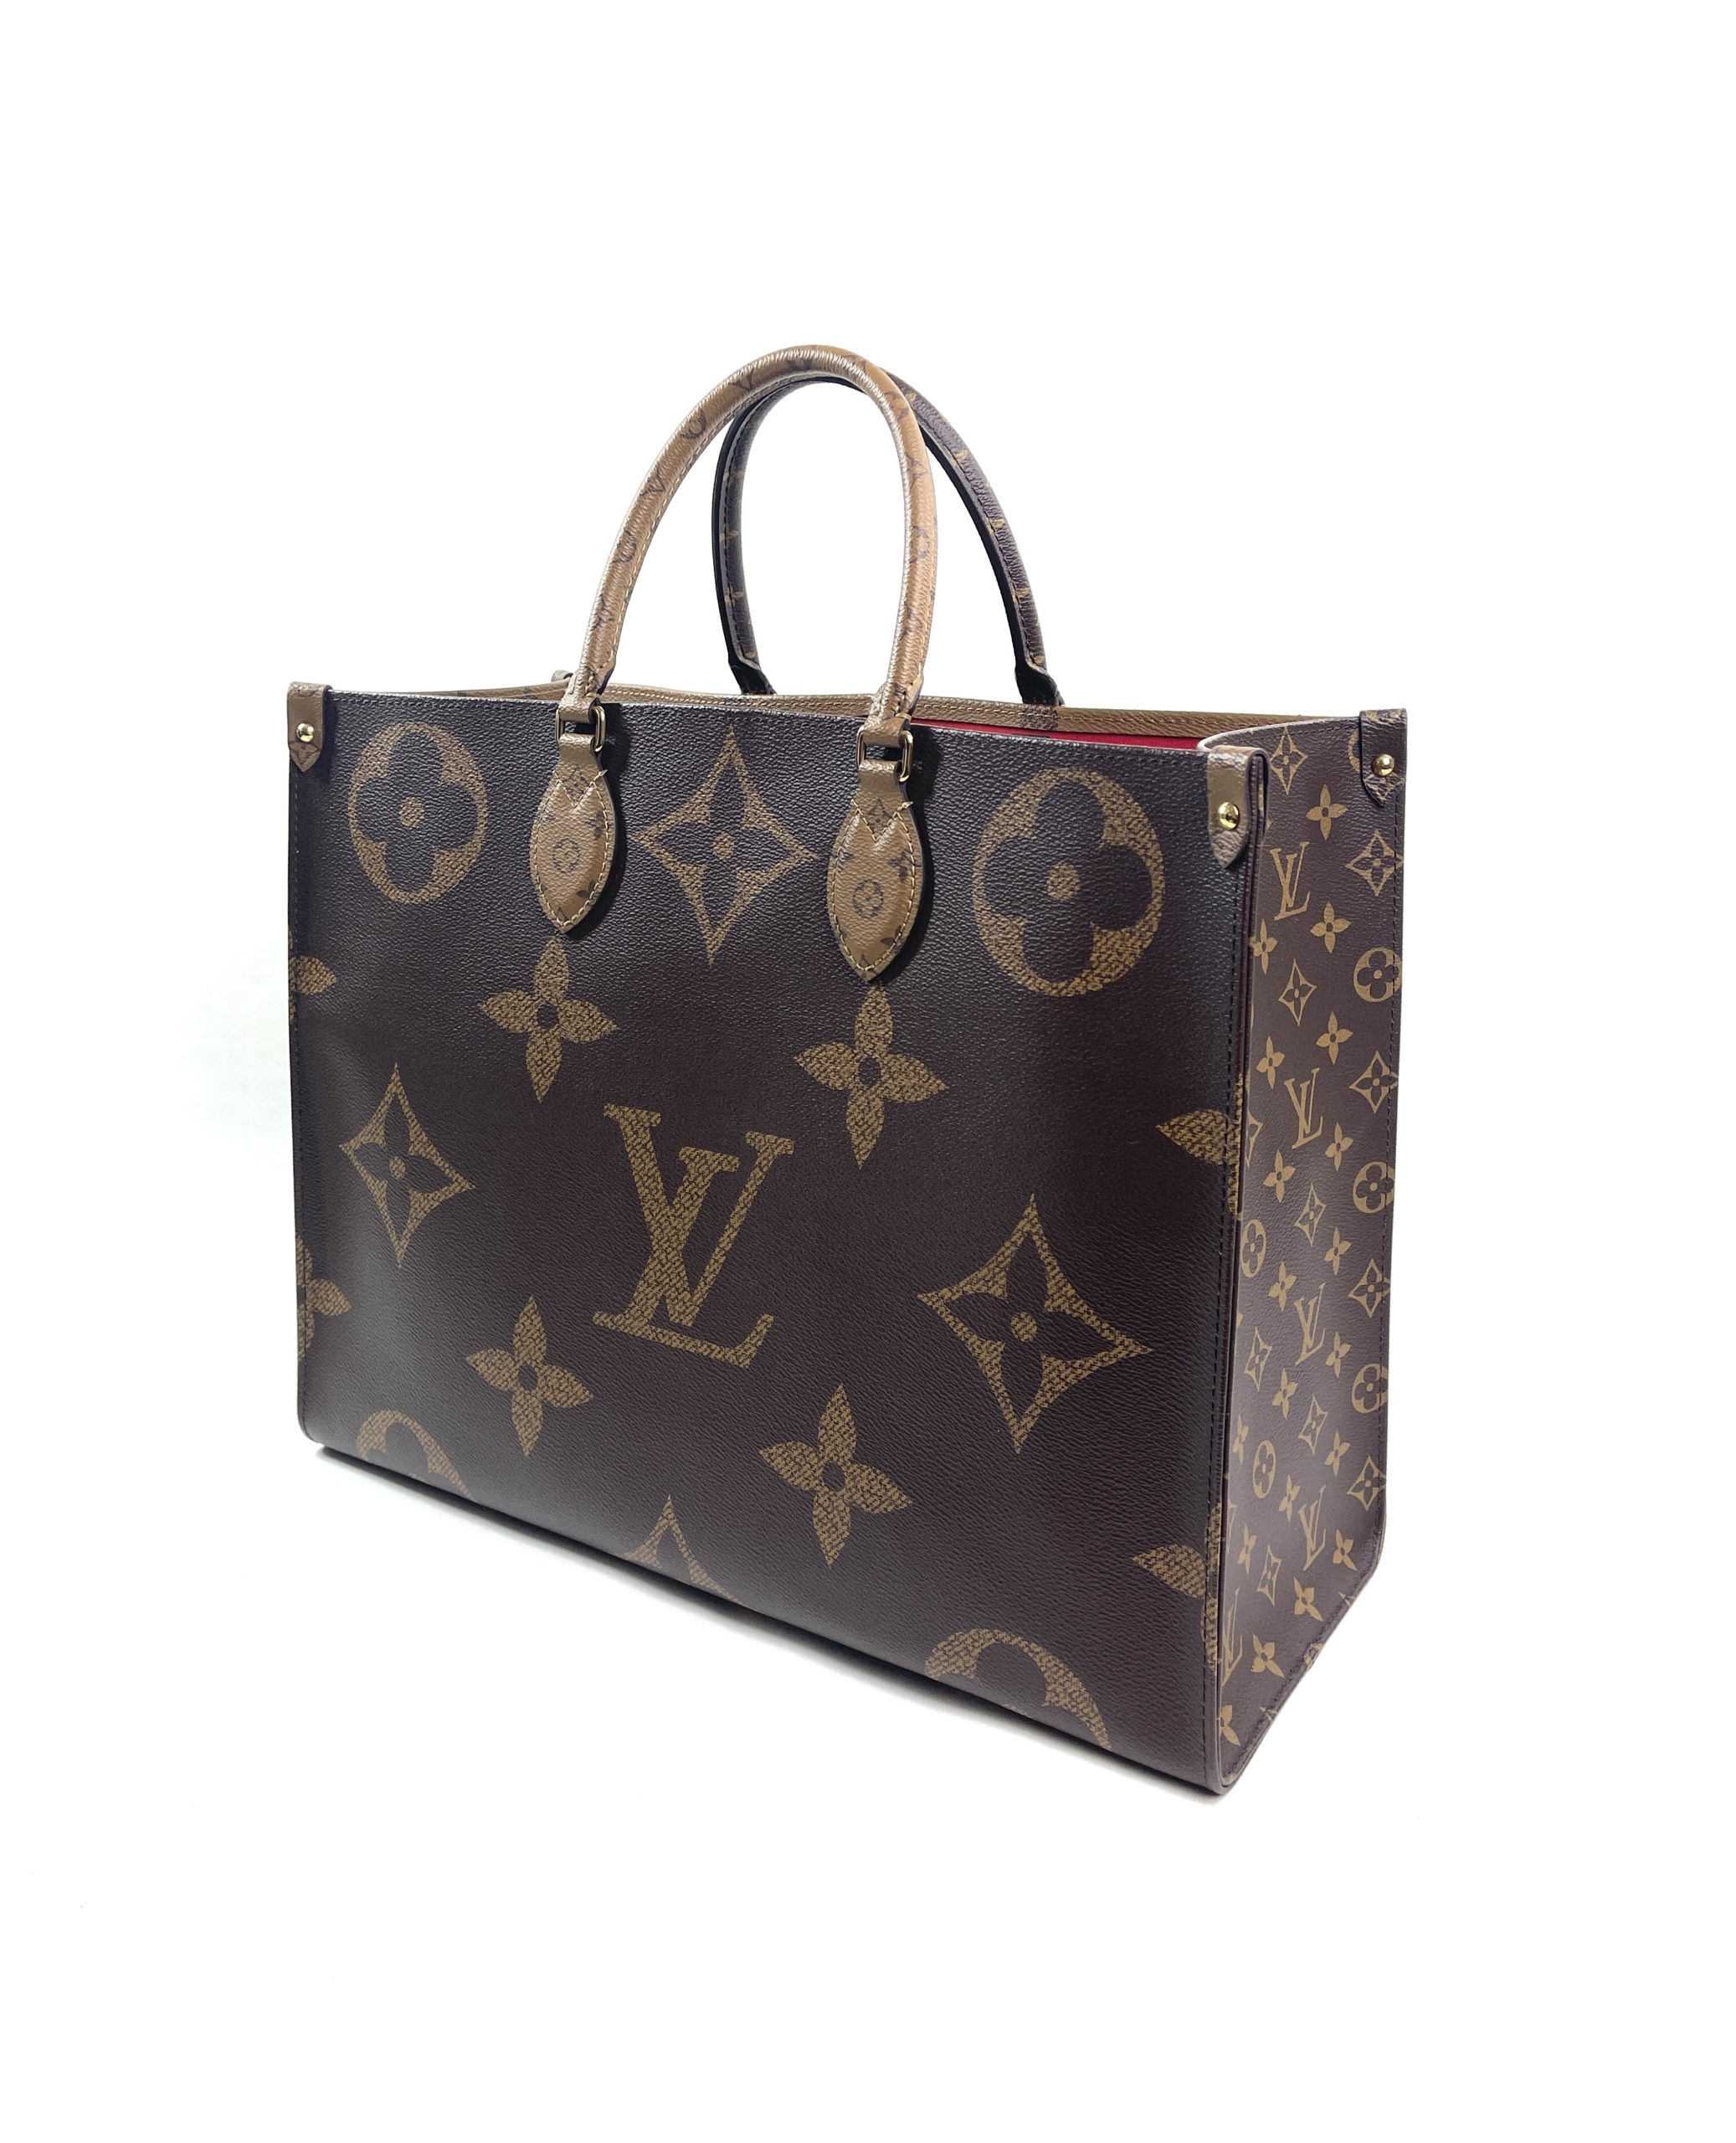 Louis Vuitton, Bags, Louis Vuitton Croisette Epi Leather Zipped Tote  Discontinued Like New Condition